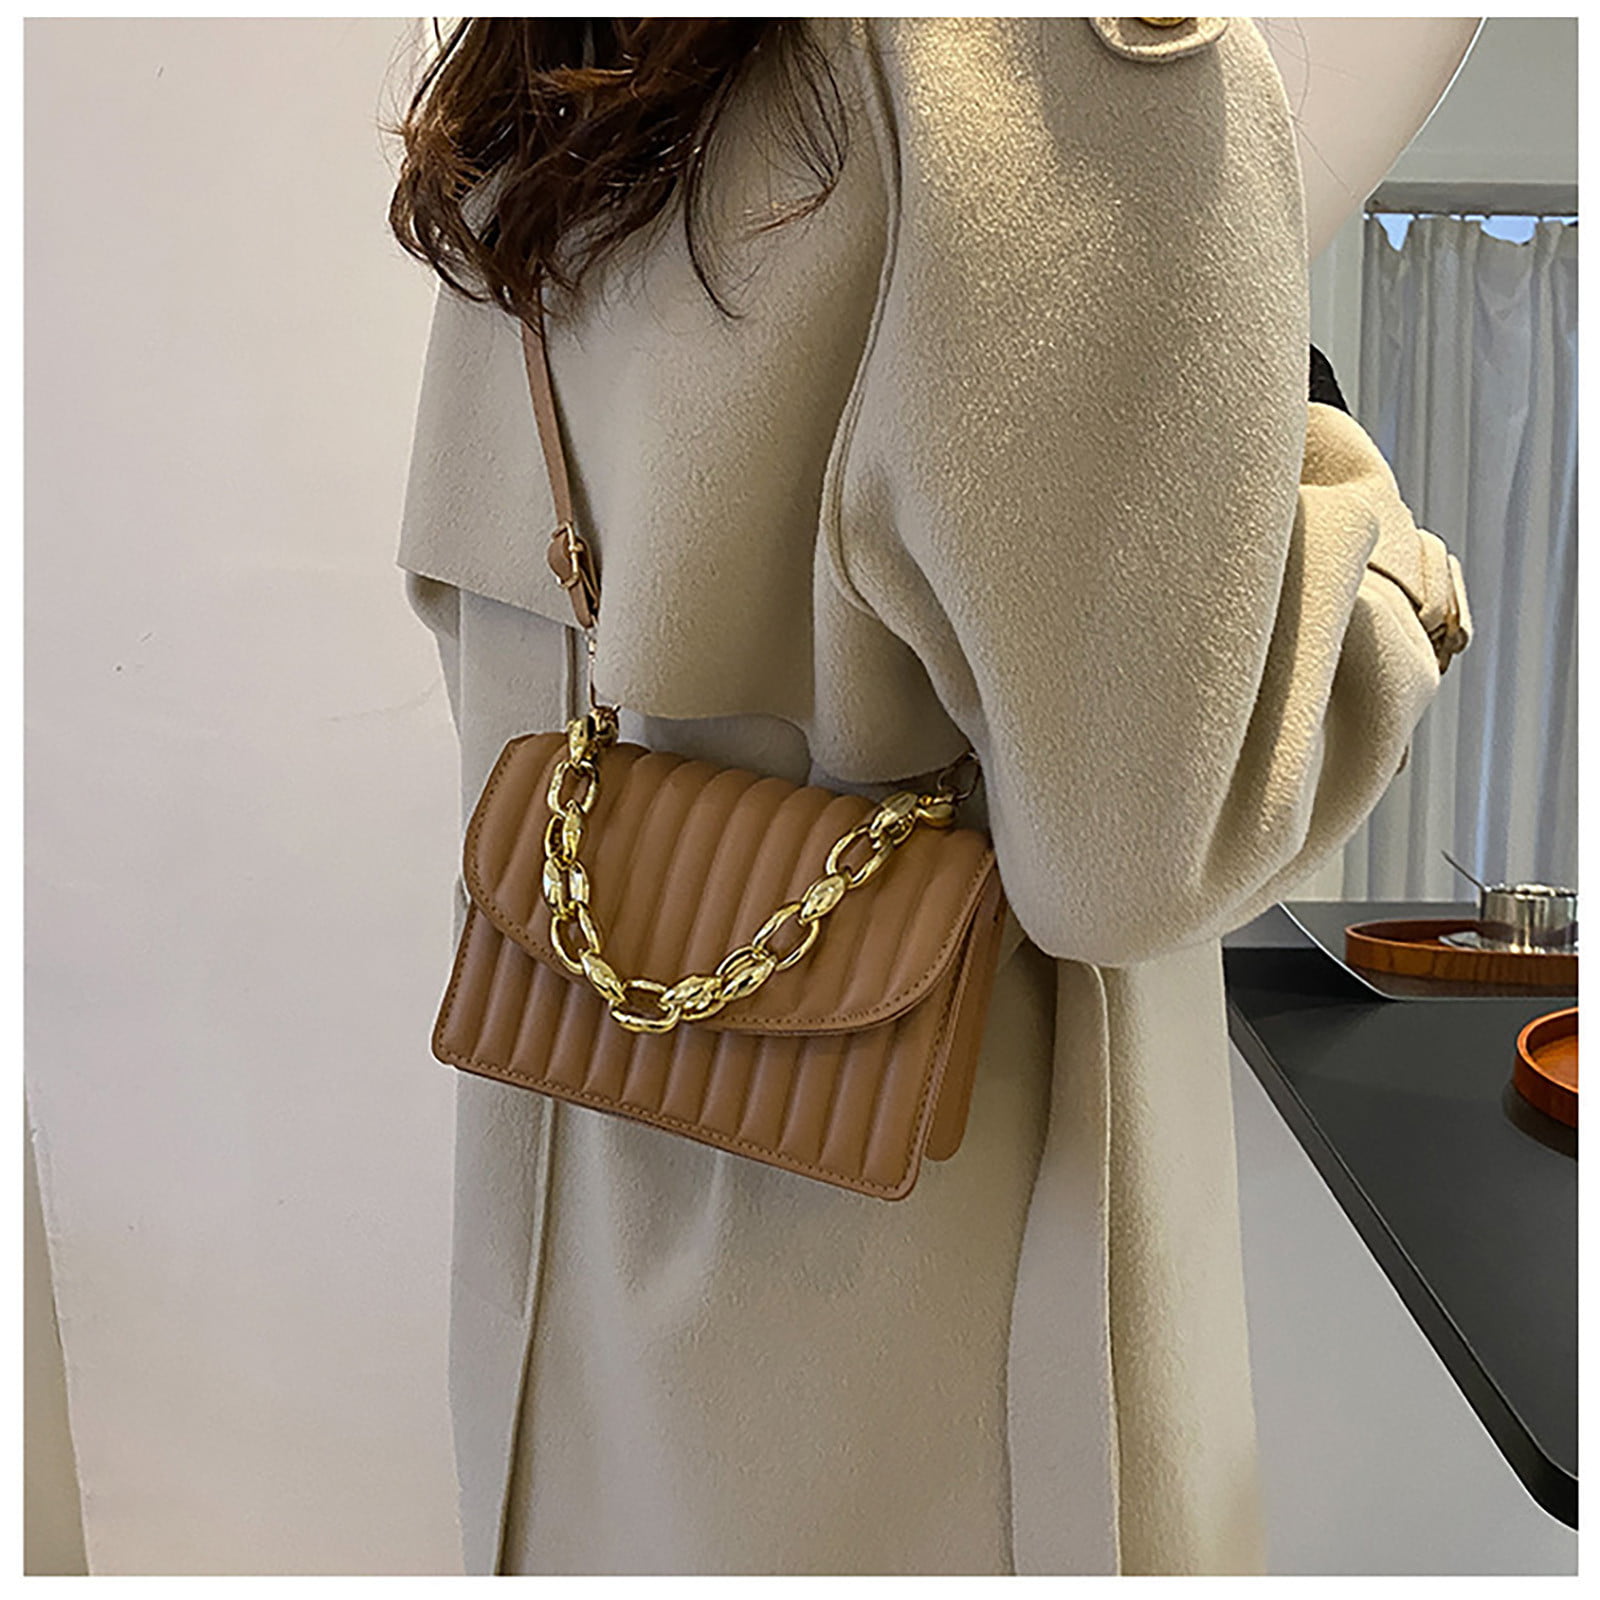 This Year's Popular Vintage Mini Women's Bag, Fashionable Crossbody  Shoulder Bag For Casual Wear